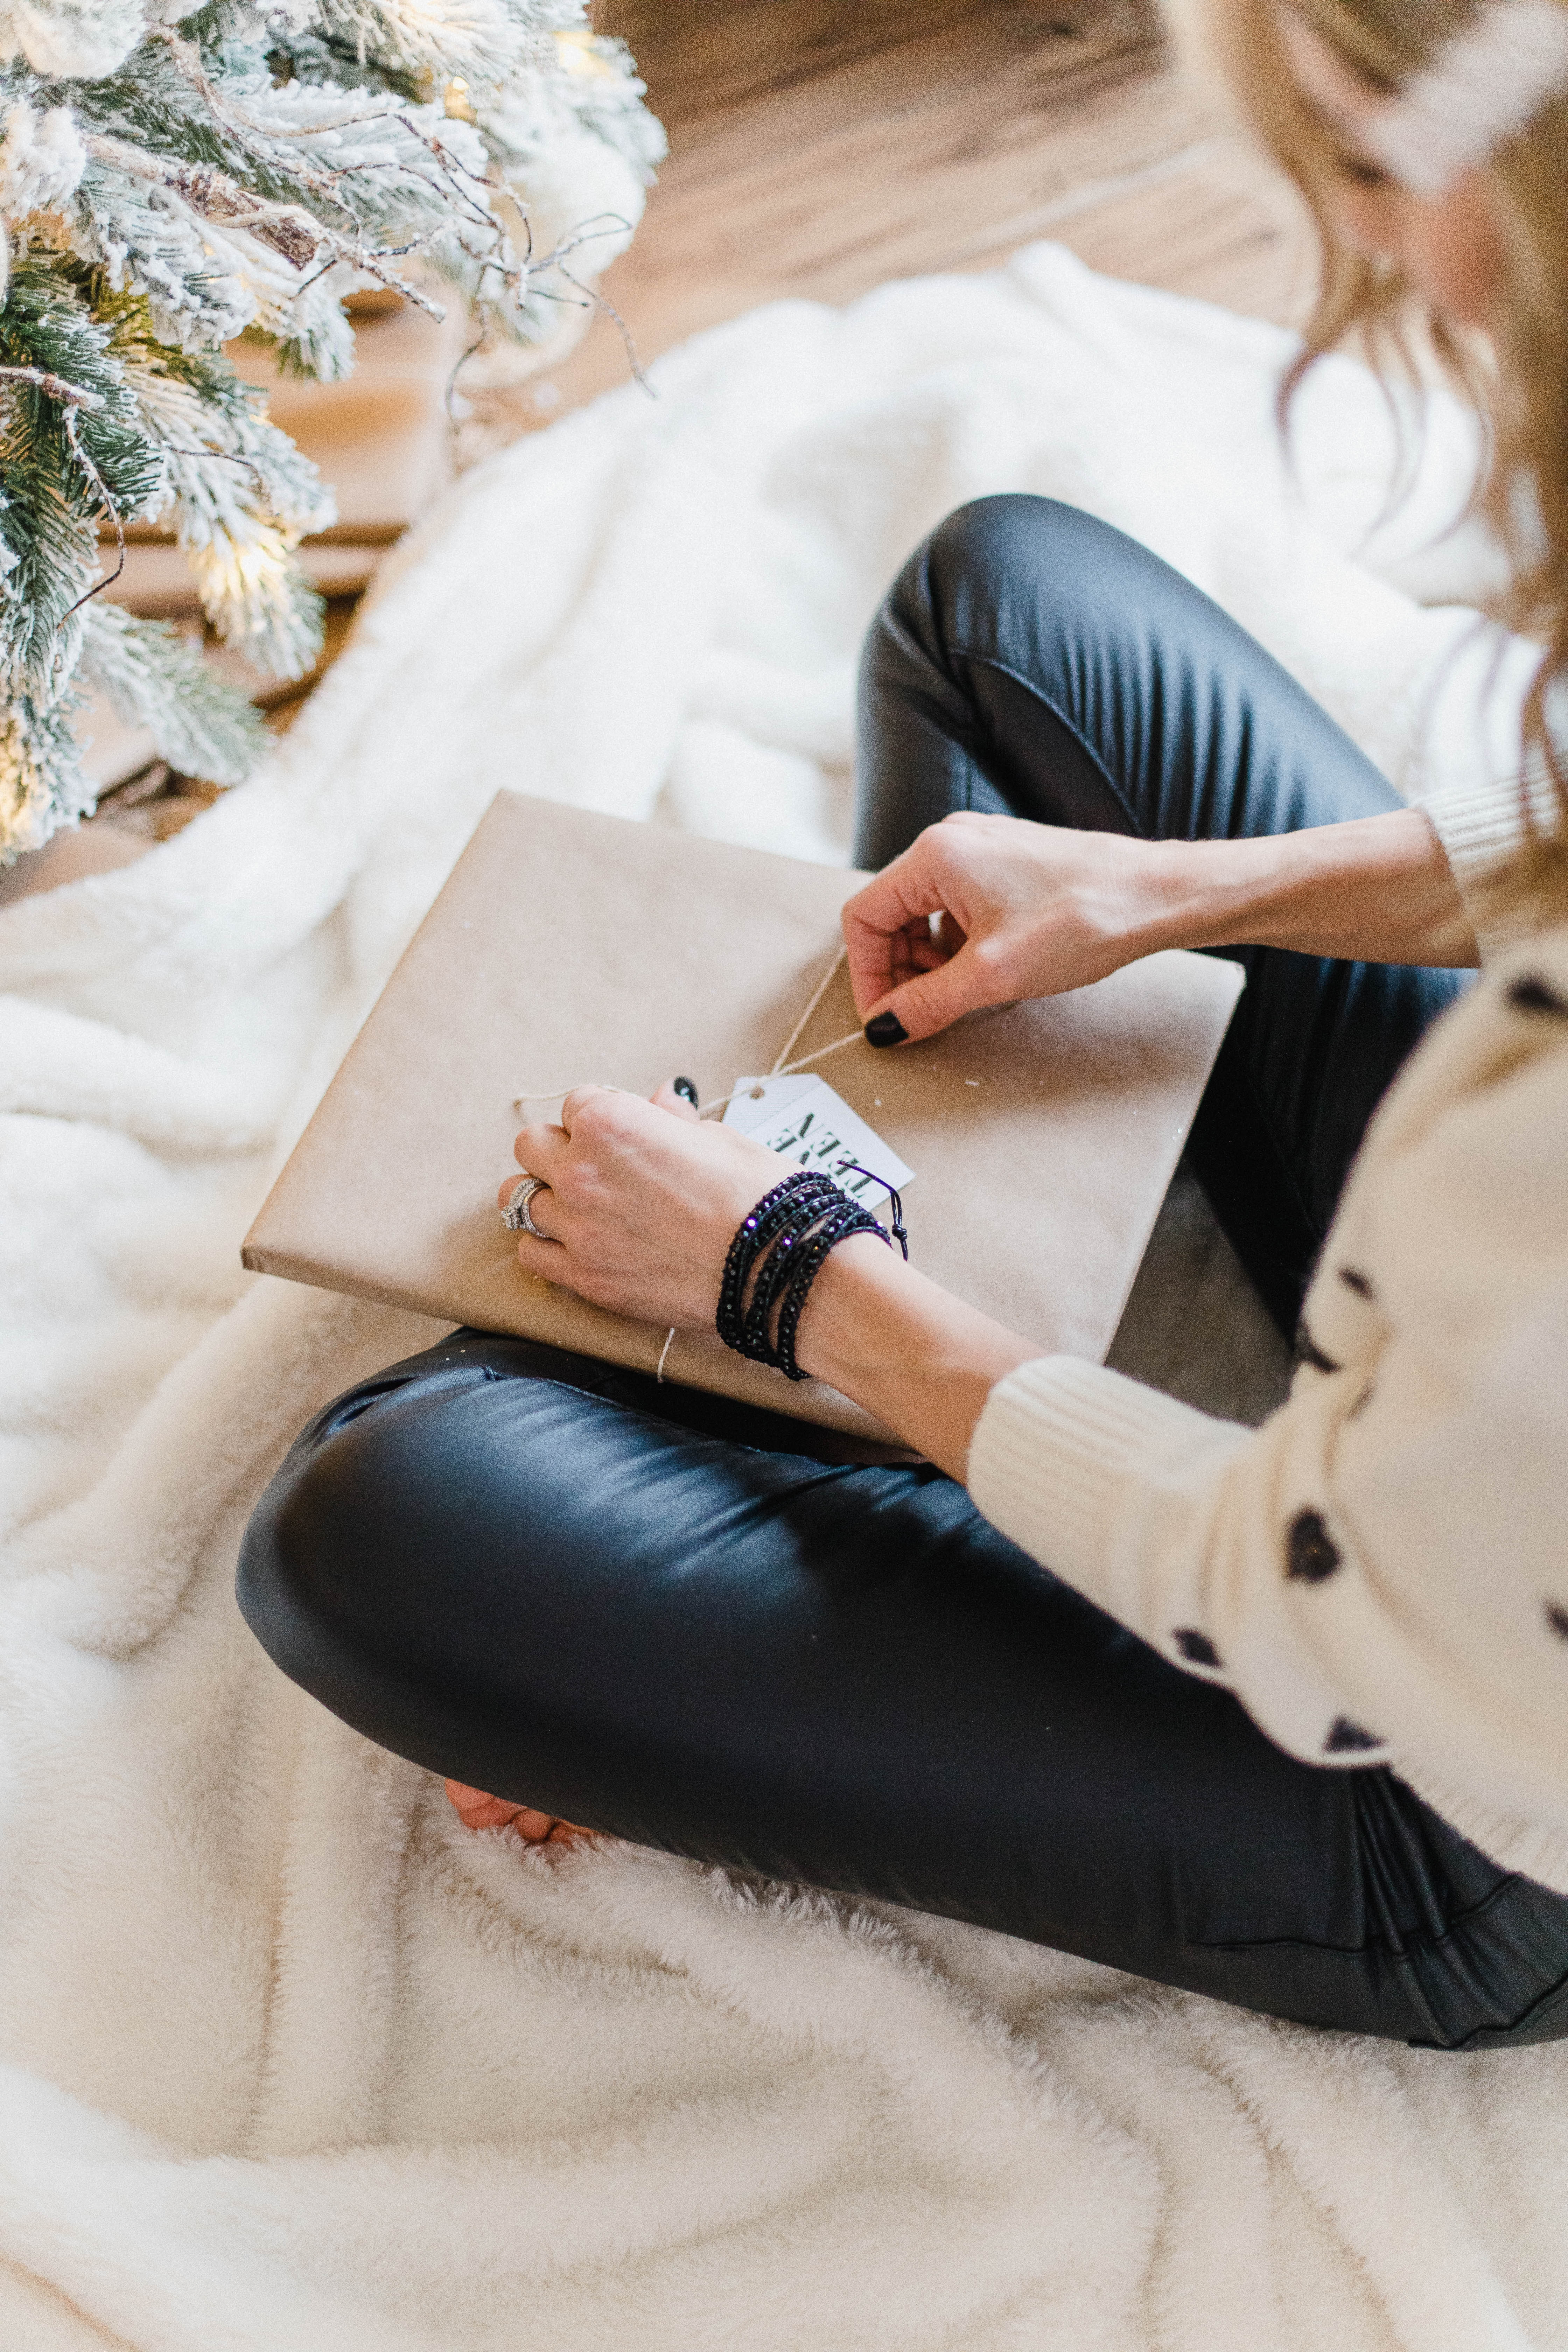 Connecticut life and style blogger Lauren McBride shares great stocking stuffers from Victoria Emerson, including their holiday collection and sale.